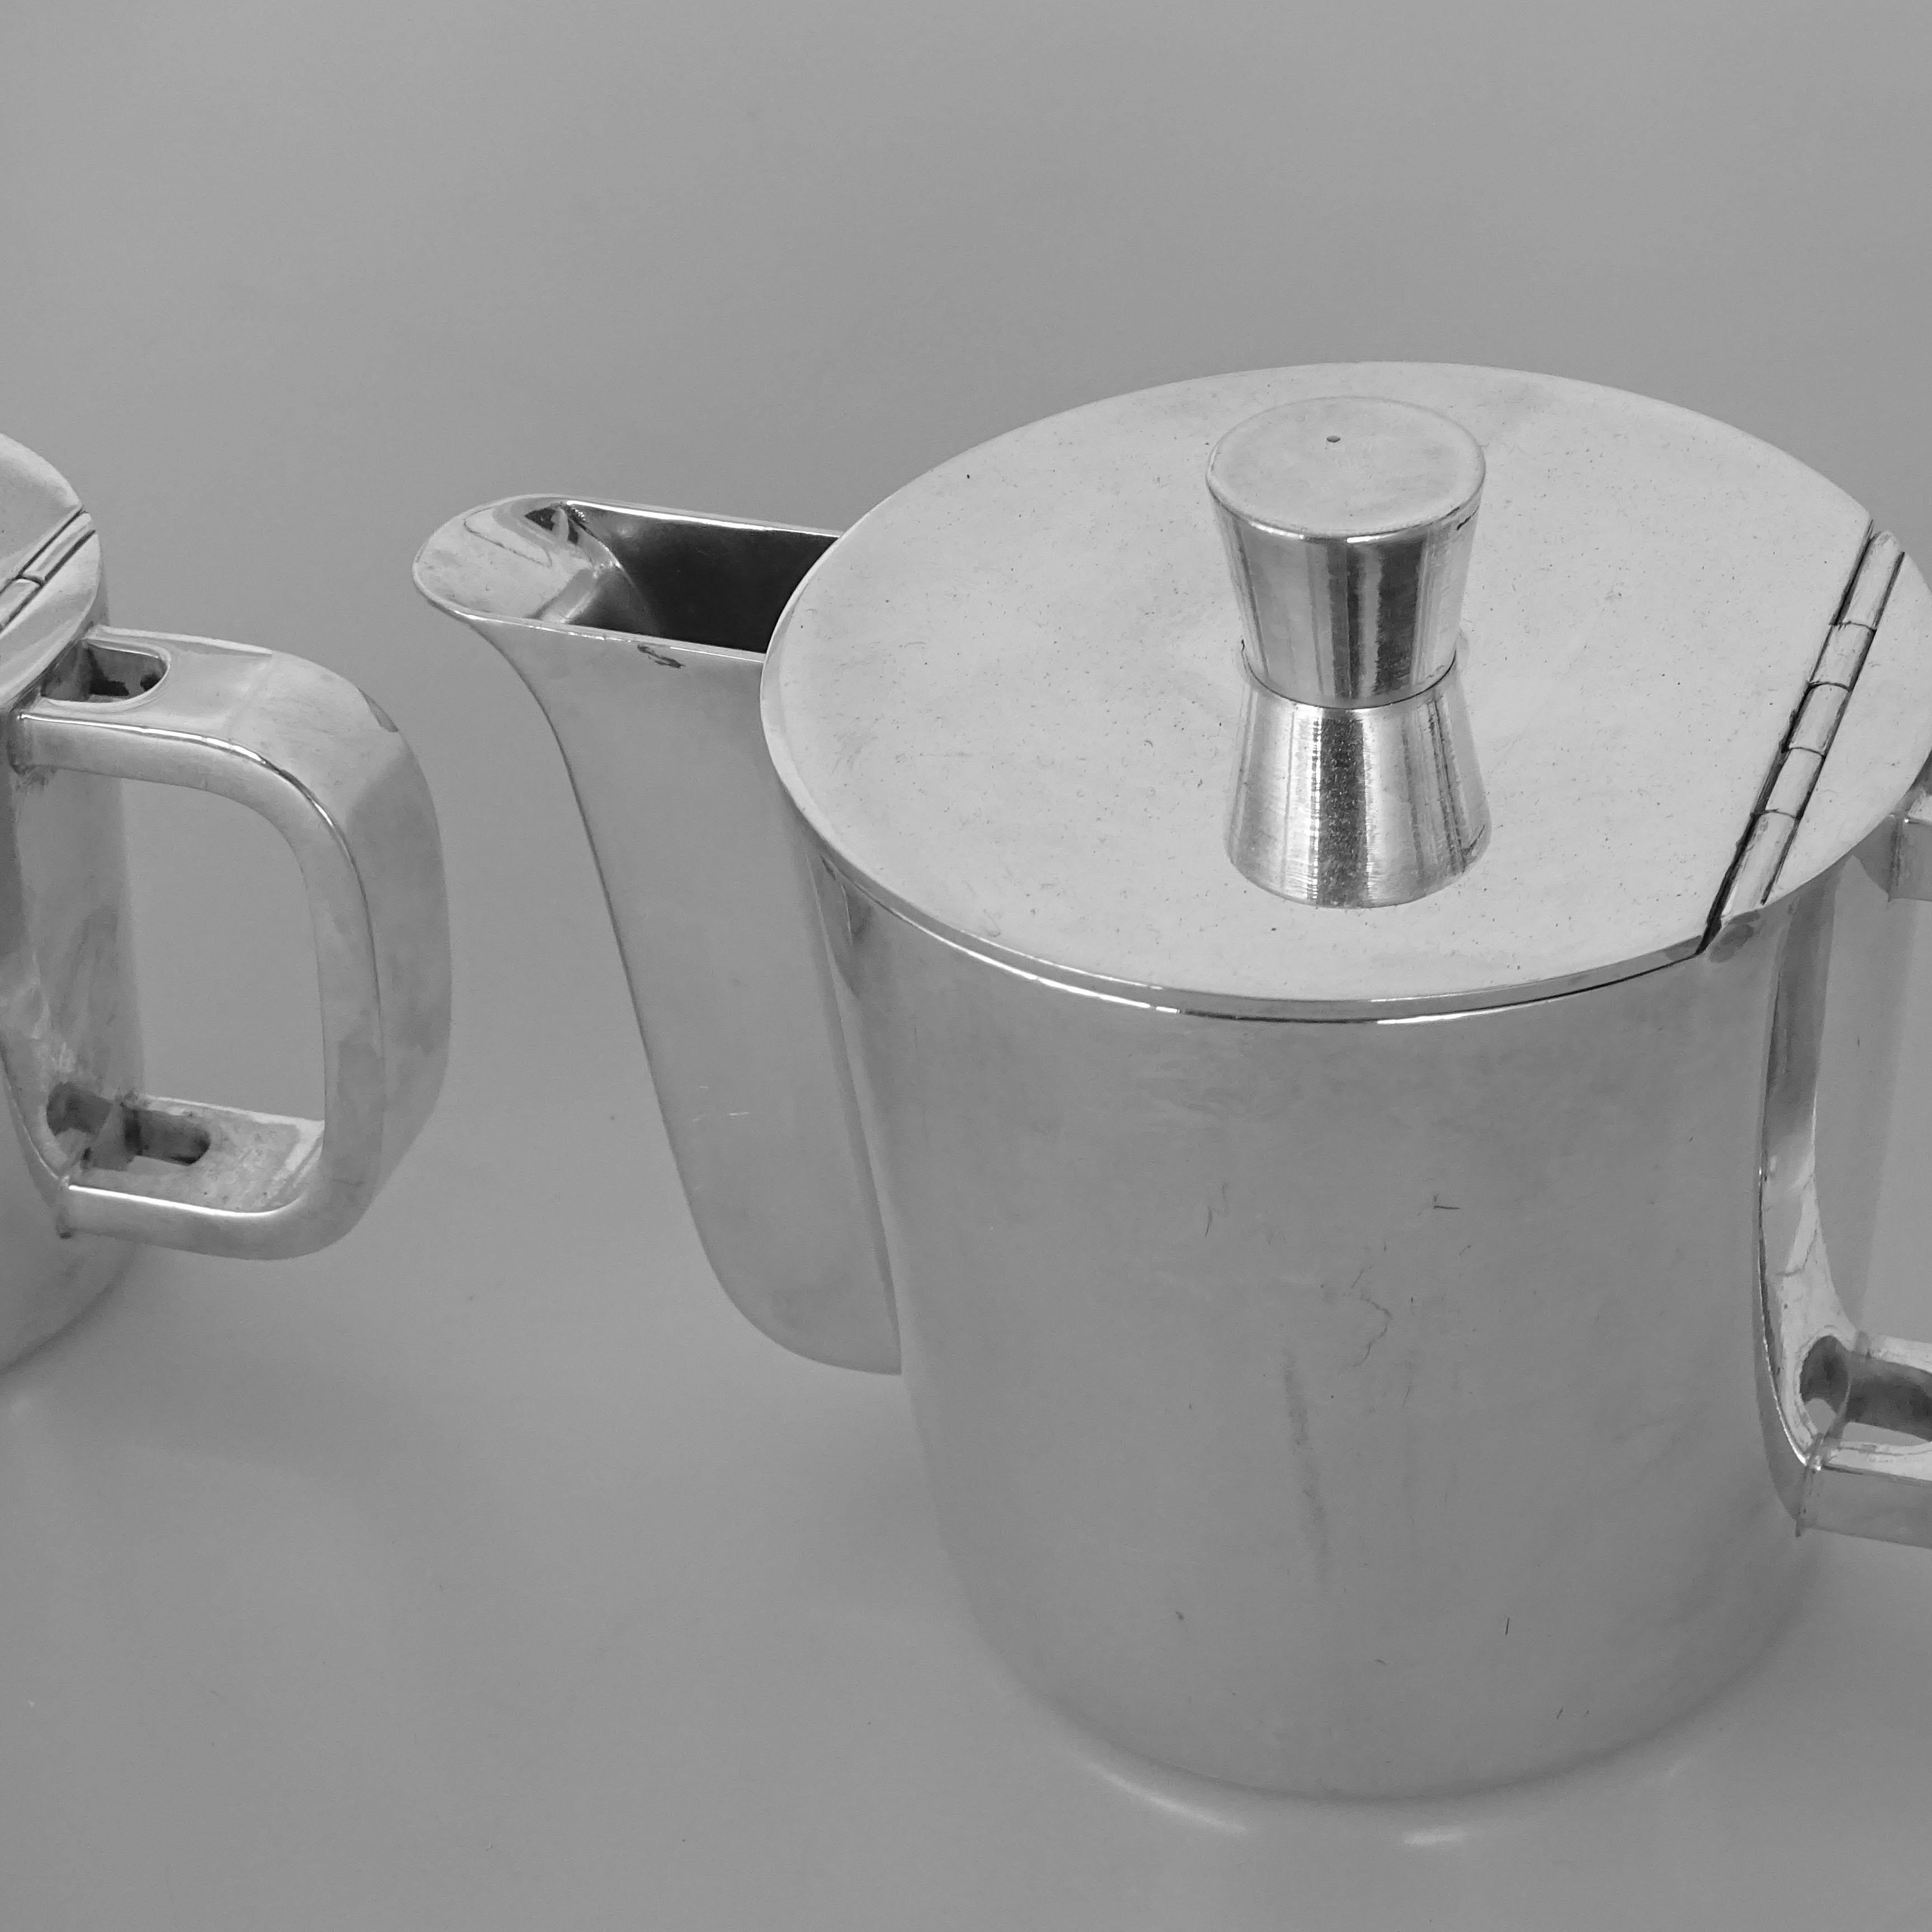 Mid-20th Century Gio Ponti Alpaca Coffee Set for the Sixth Triennale, Italy, 1930s For Sale